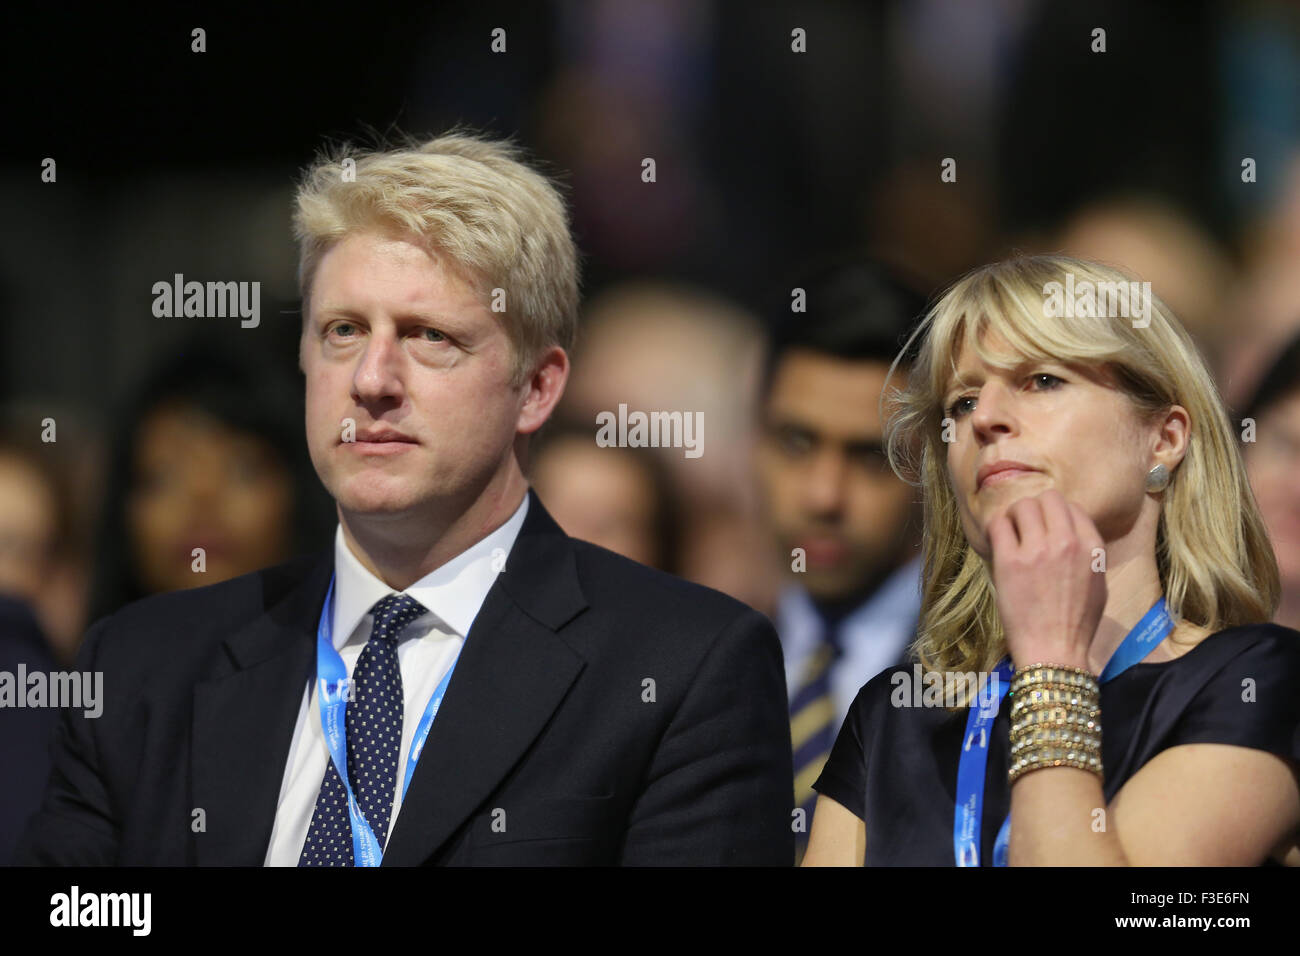 Manchester, UK. 6th October, 2015. Jo Johnson & Rachel Johnson Brother & Sister Of Boris Johnson Mp Conservative Party Conference 2015 Manchester Central, Manchester, England 06 October 2015 Listen To Brother Boris;S Speech At The Conservative Party Conference 2015 At Manchester Central, Manchester Credit:  Allstar Picture Library/Alamy Live News Stock Photo